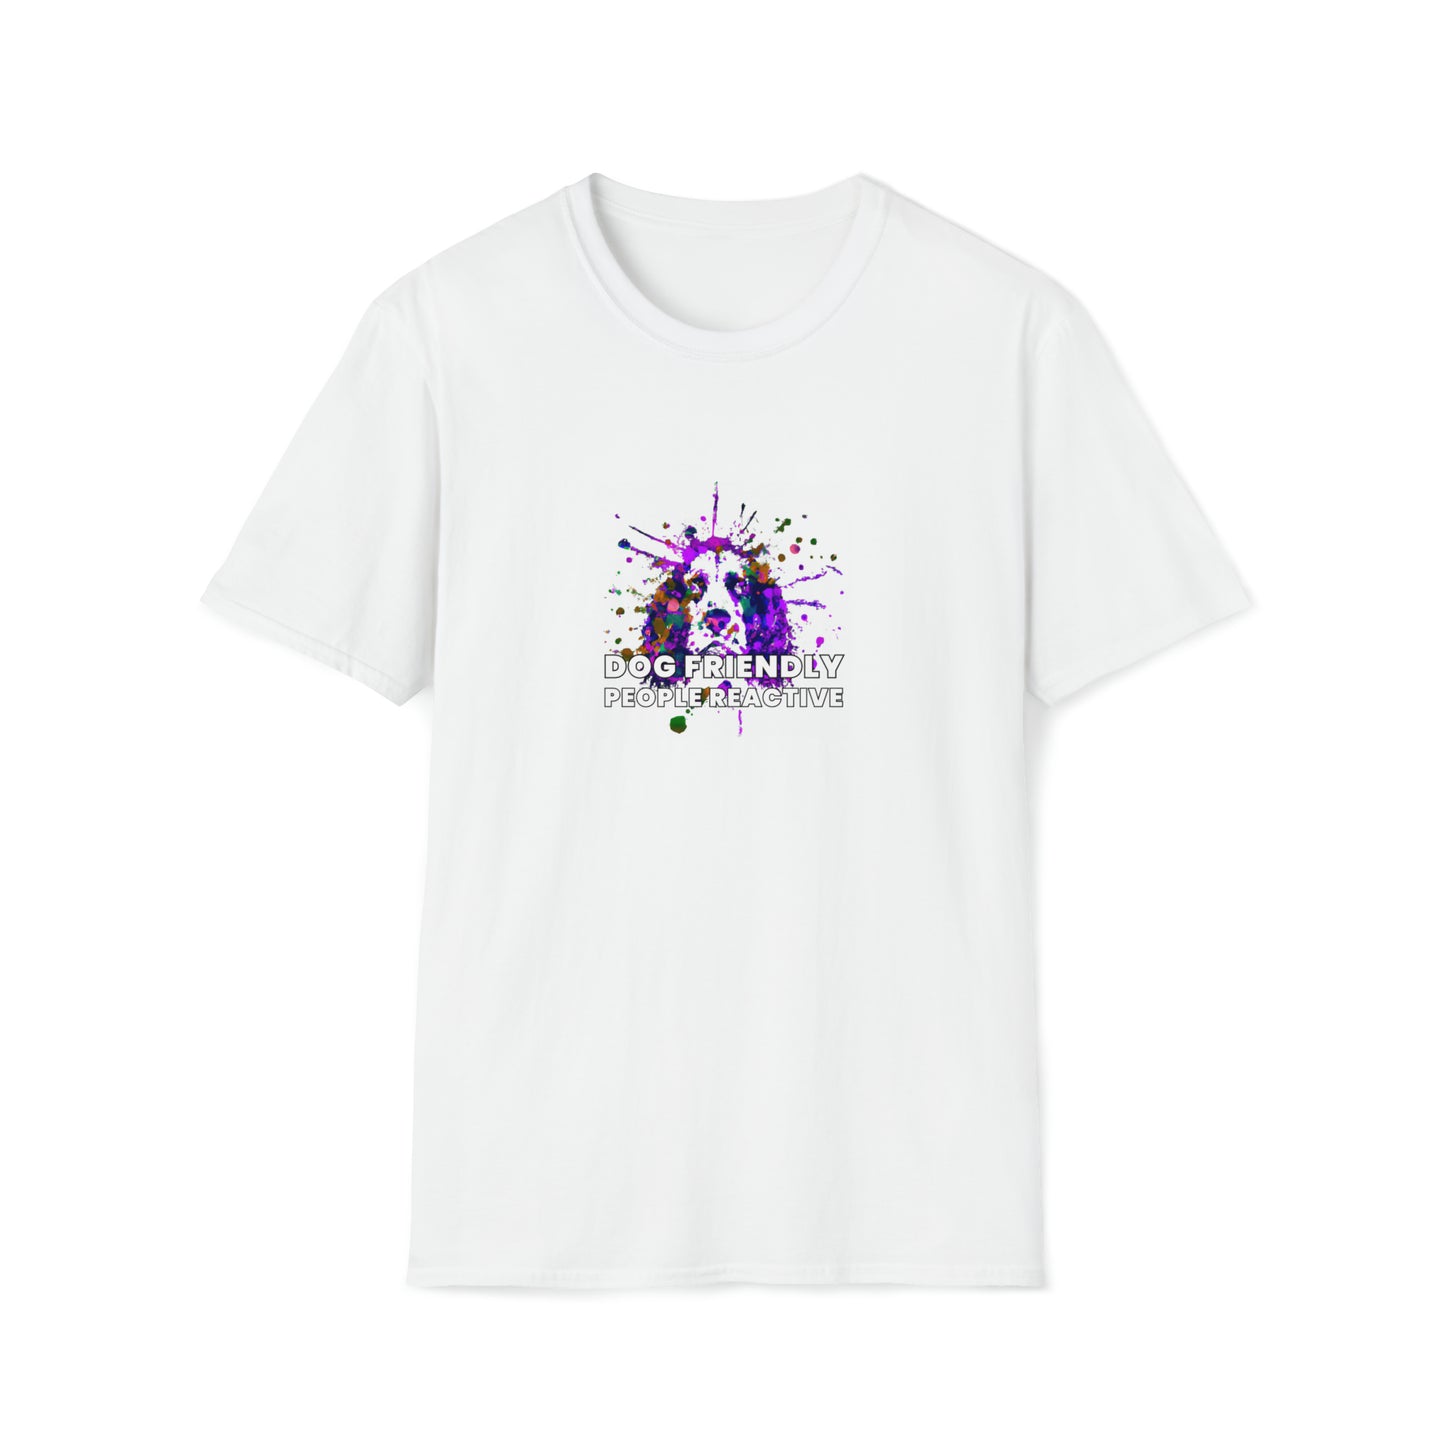 90s Fash Reality - "Dog Friendly, People Reactive" (colored swirl) Unisex Tee